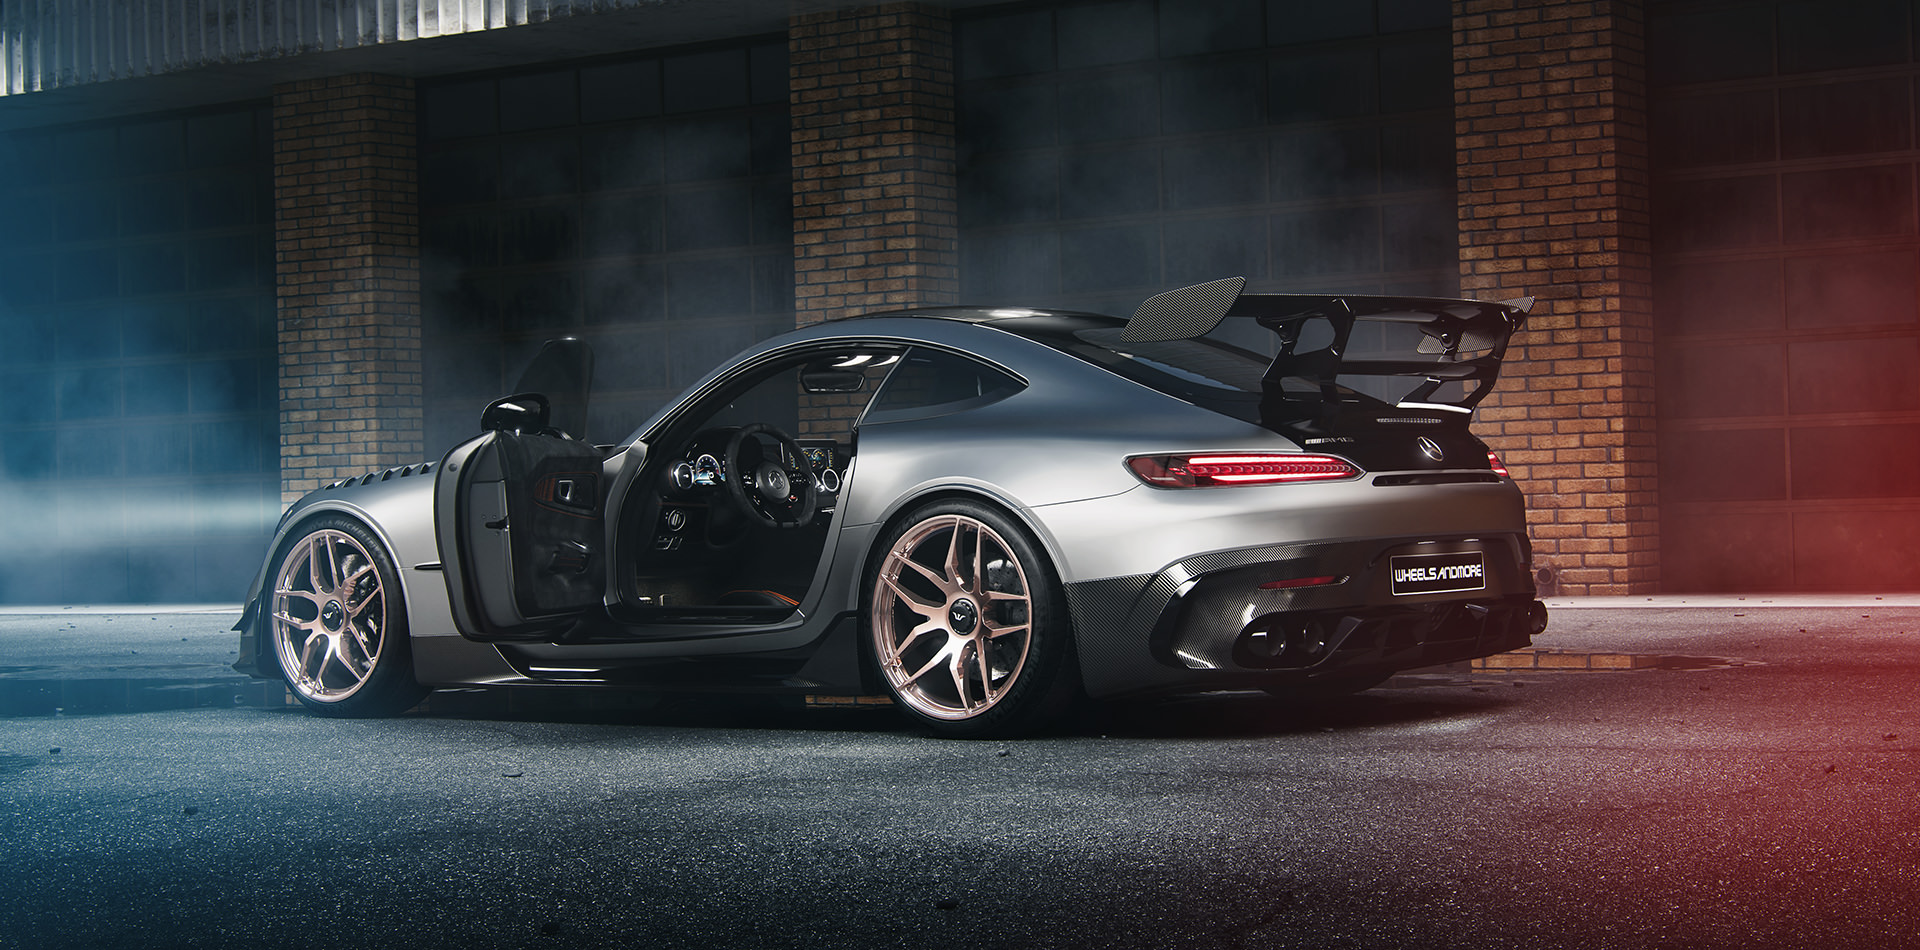 Mercedes GT Black Series tuning conversion with up to 789 hp by Wheelsandmore › Wheelsandmore Tuning